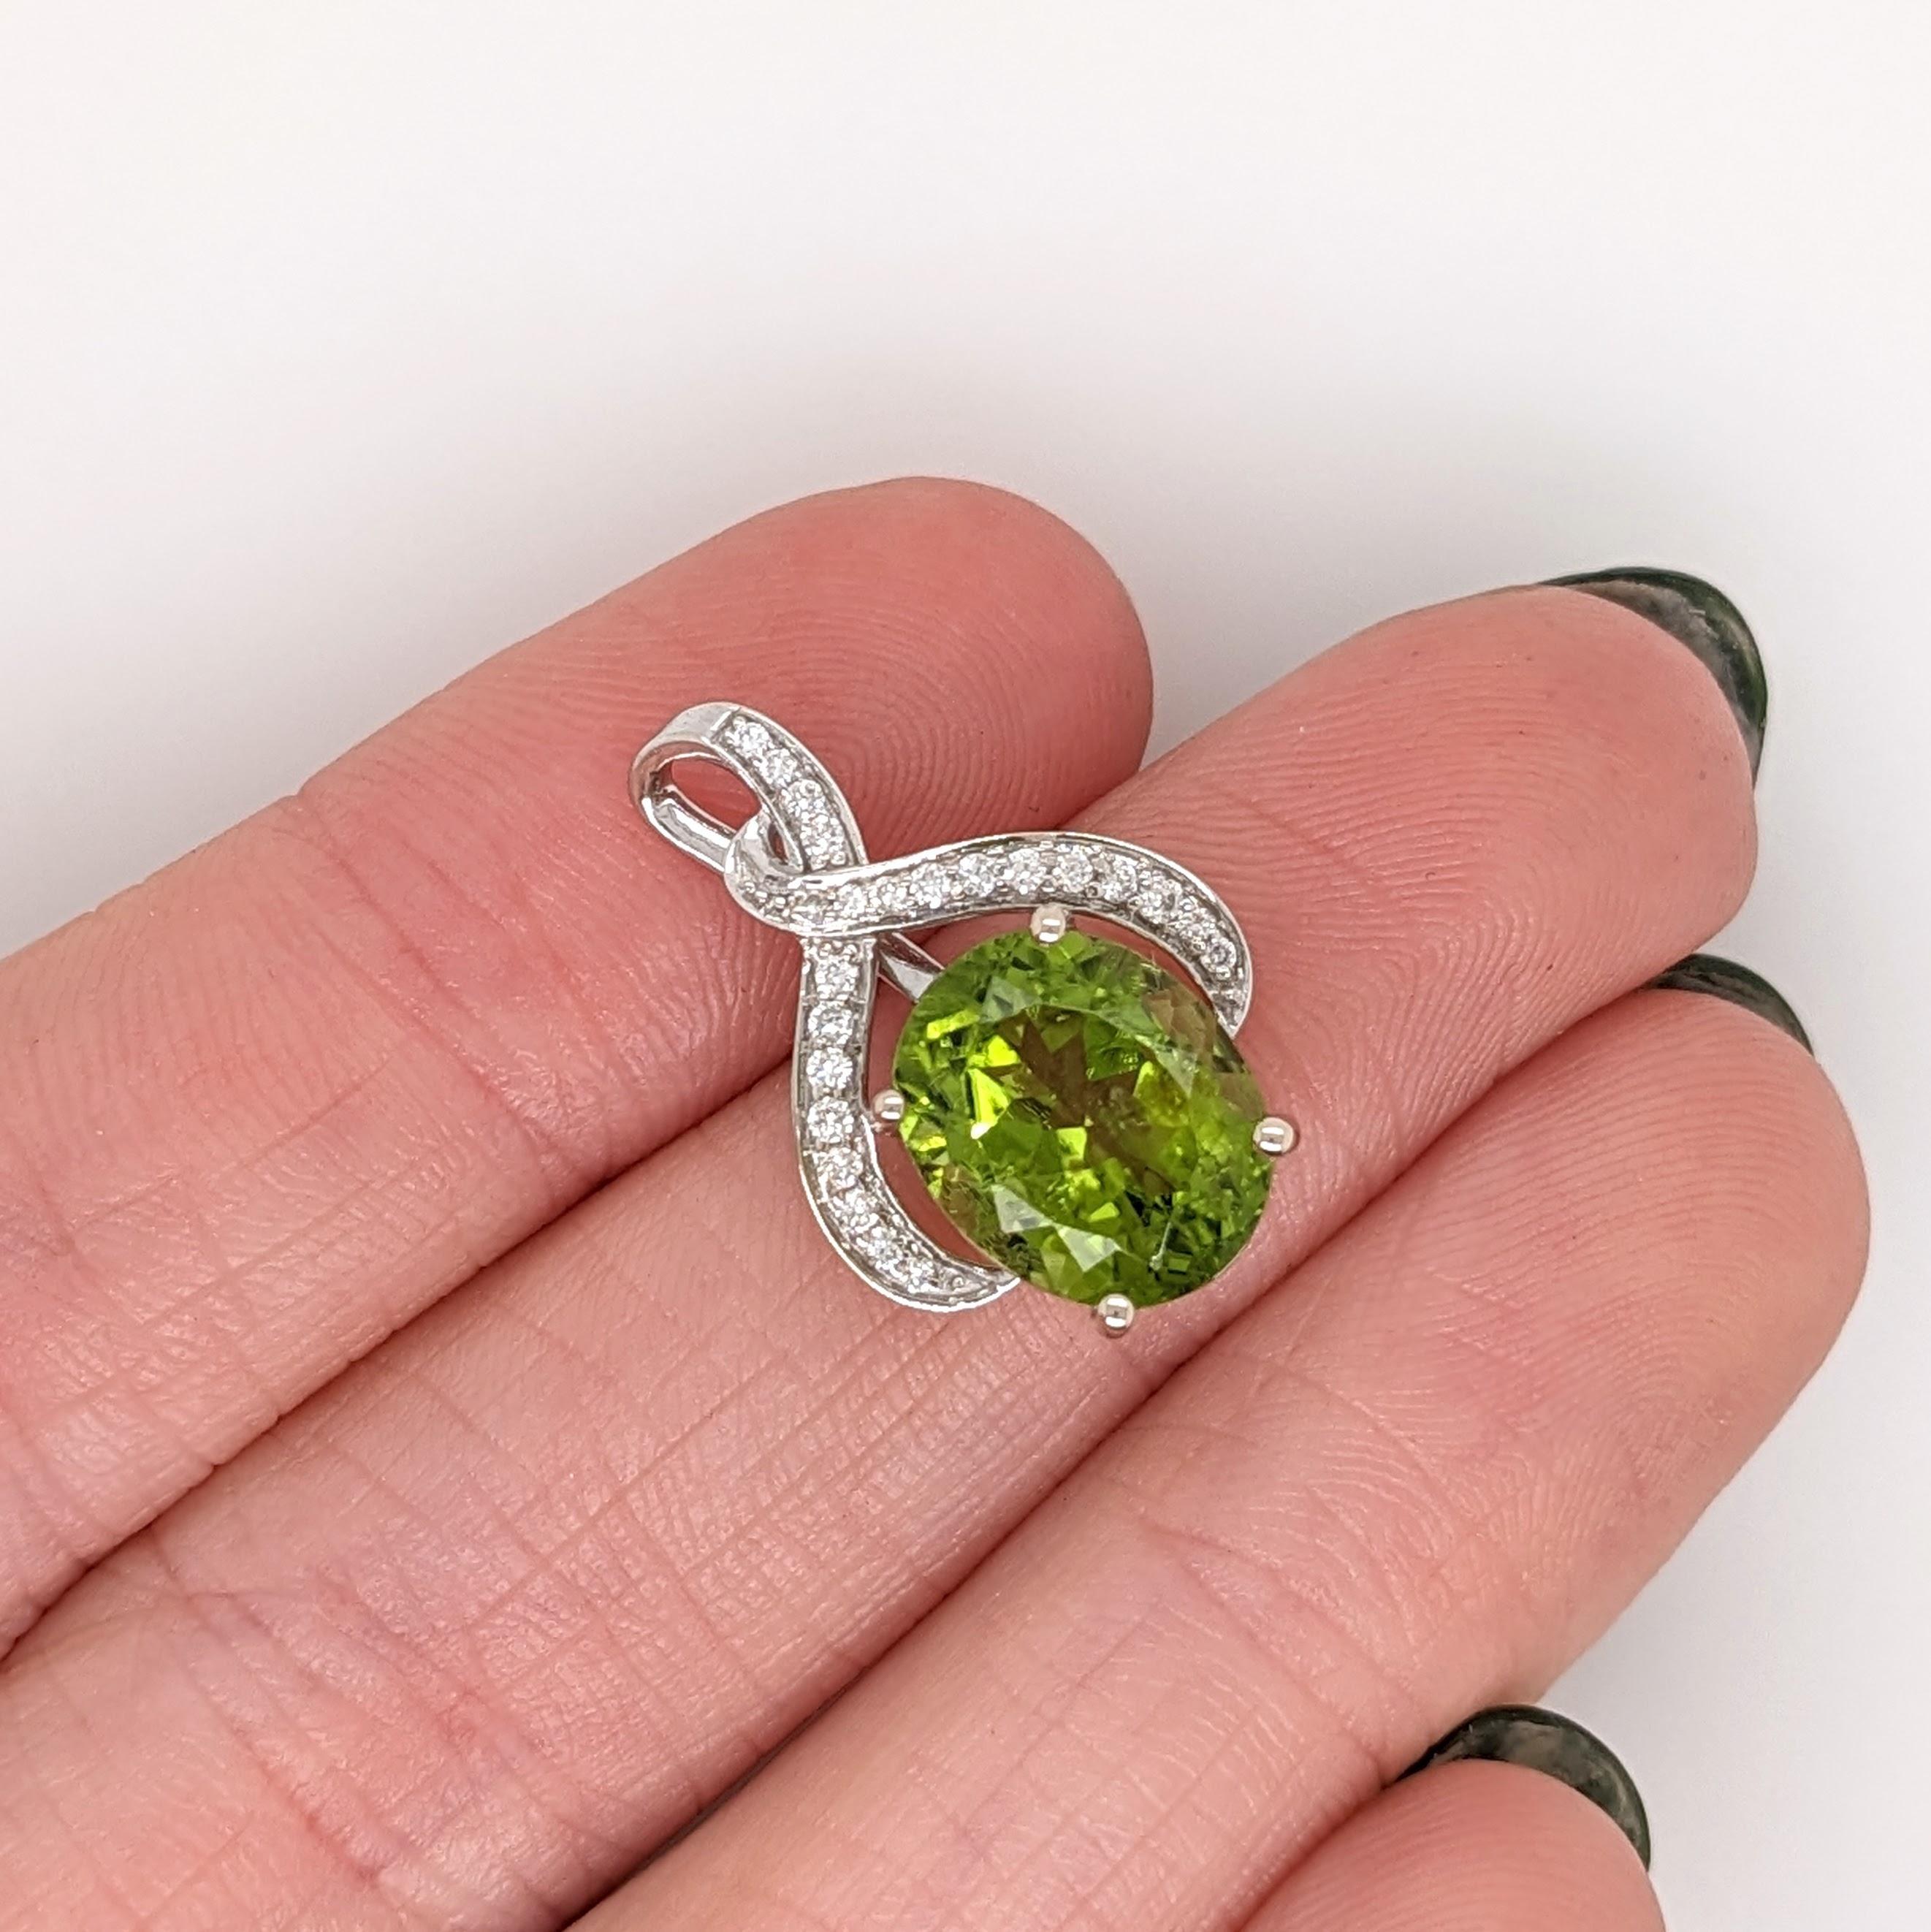 4.4ct Peridot Pendant w Earth Mined Diamonds in Solid 14K Gold Oval 11x9mm For Sale 2